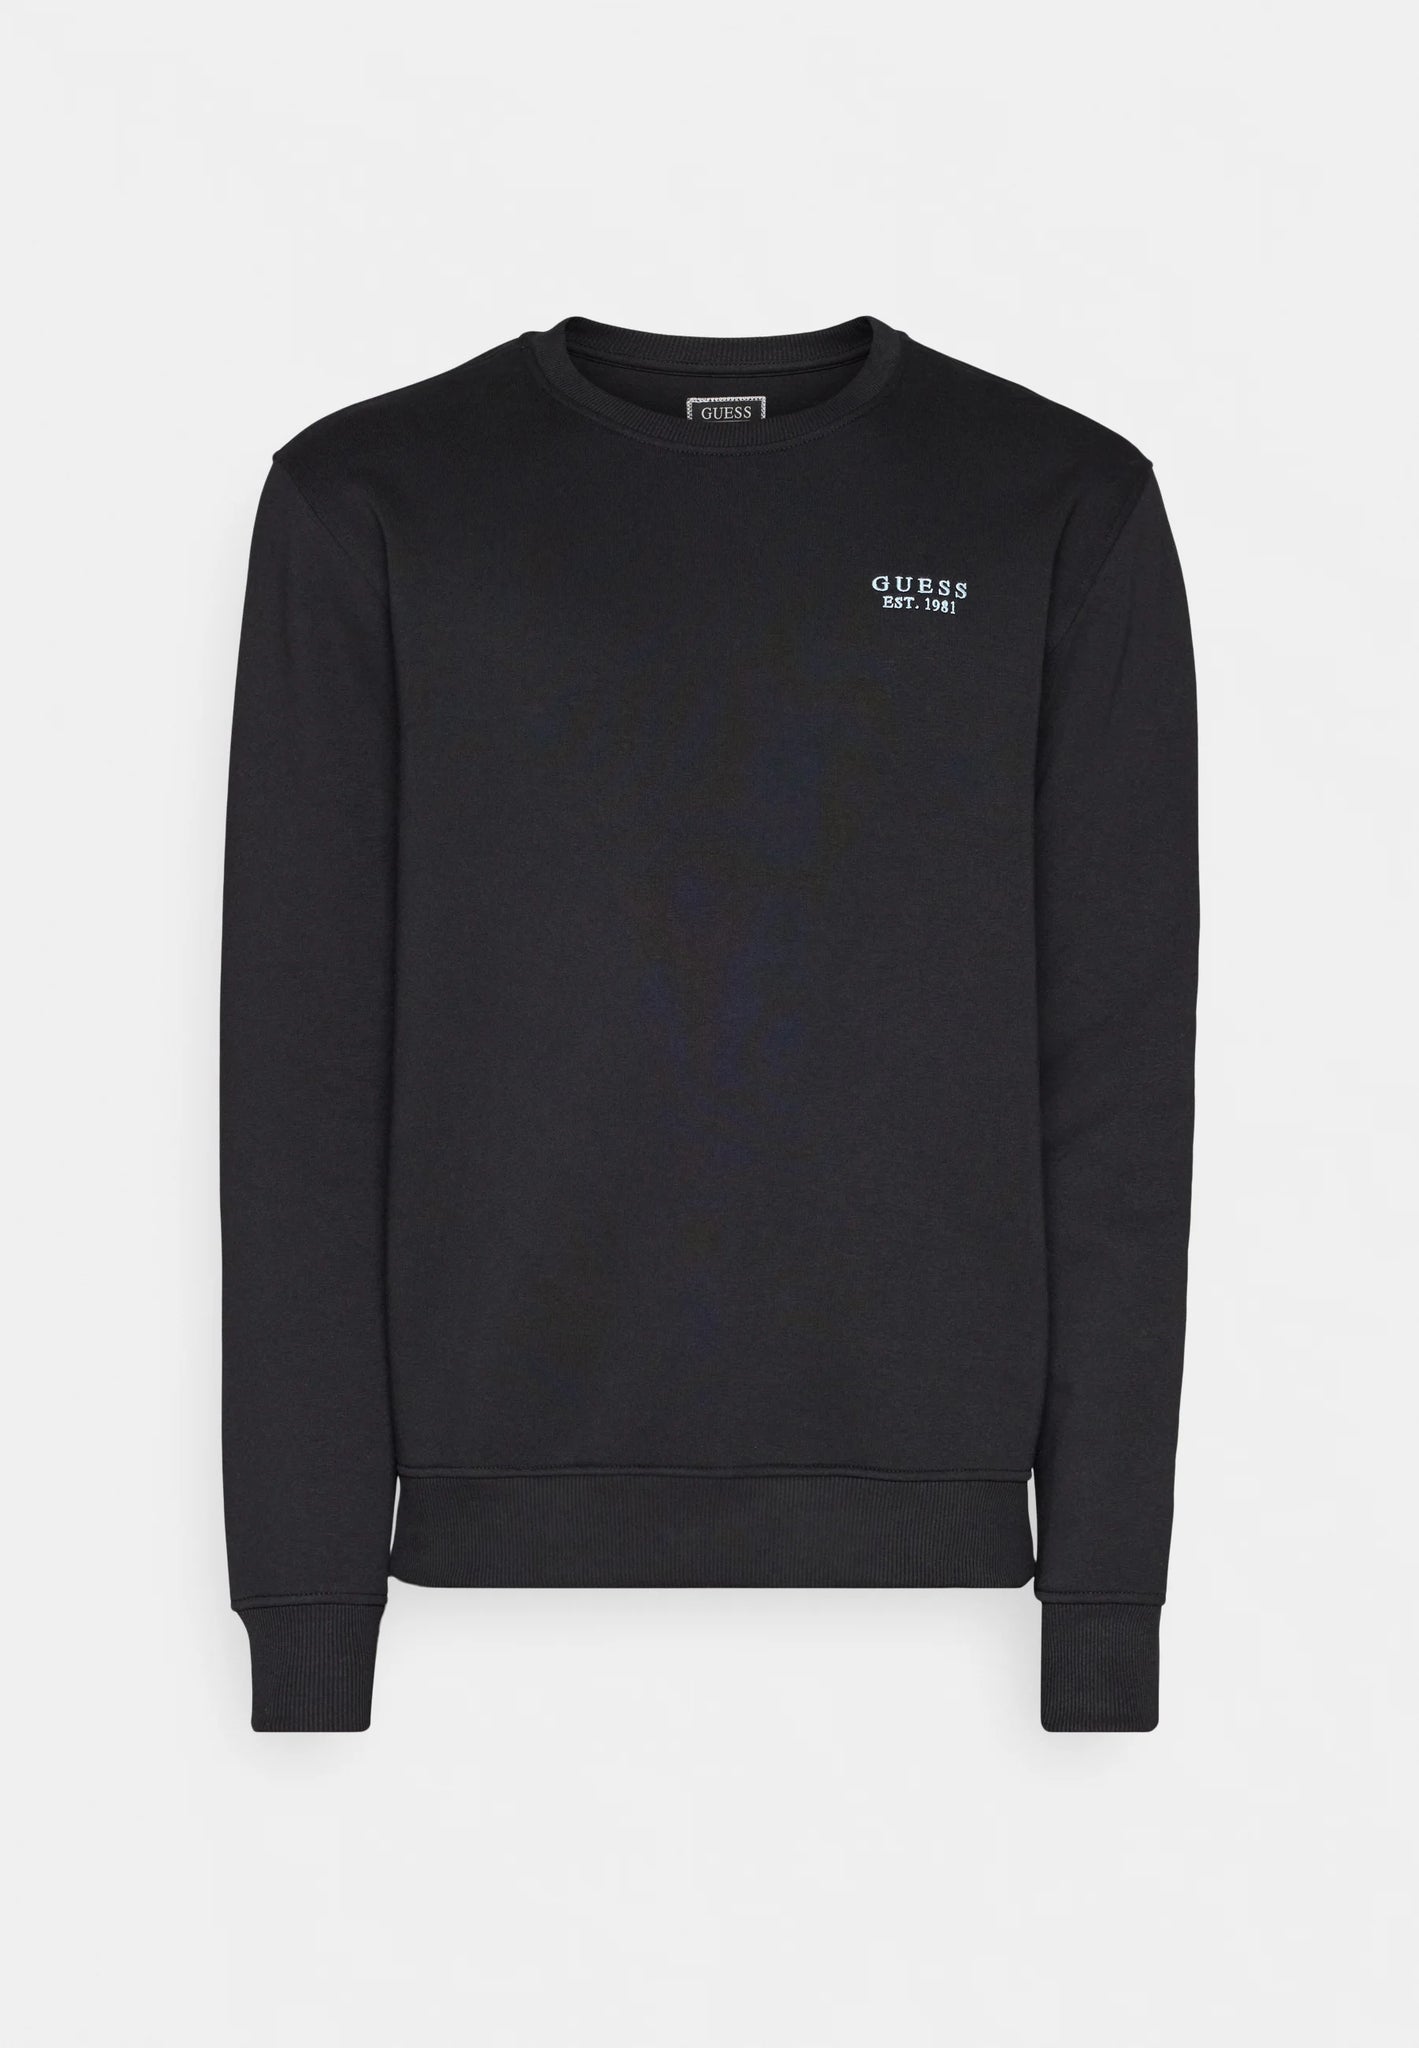 Guess Embroidered Back Box Sweatshirt